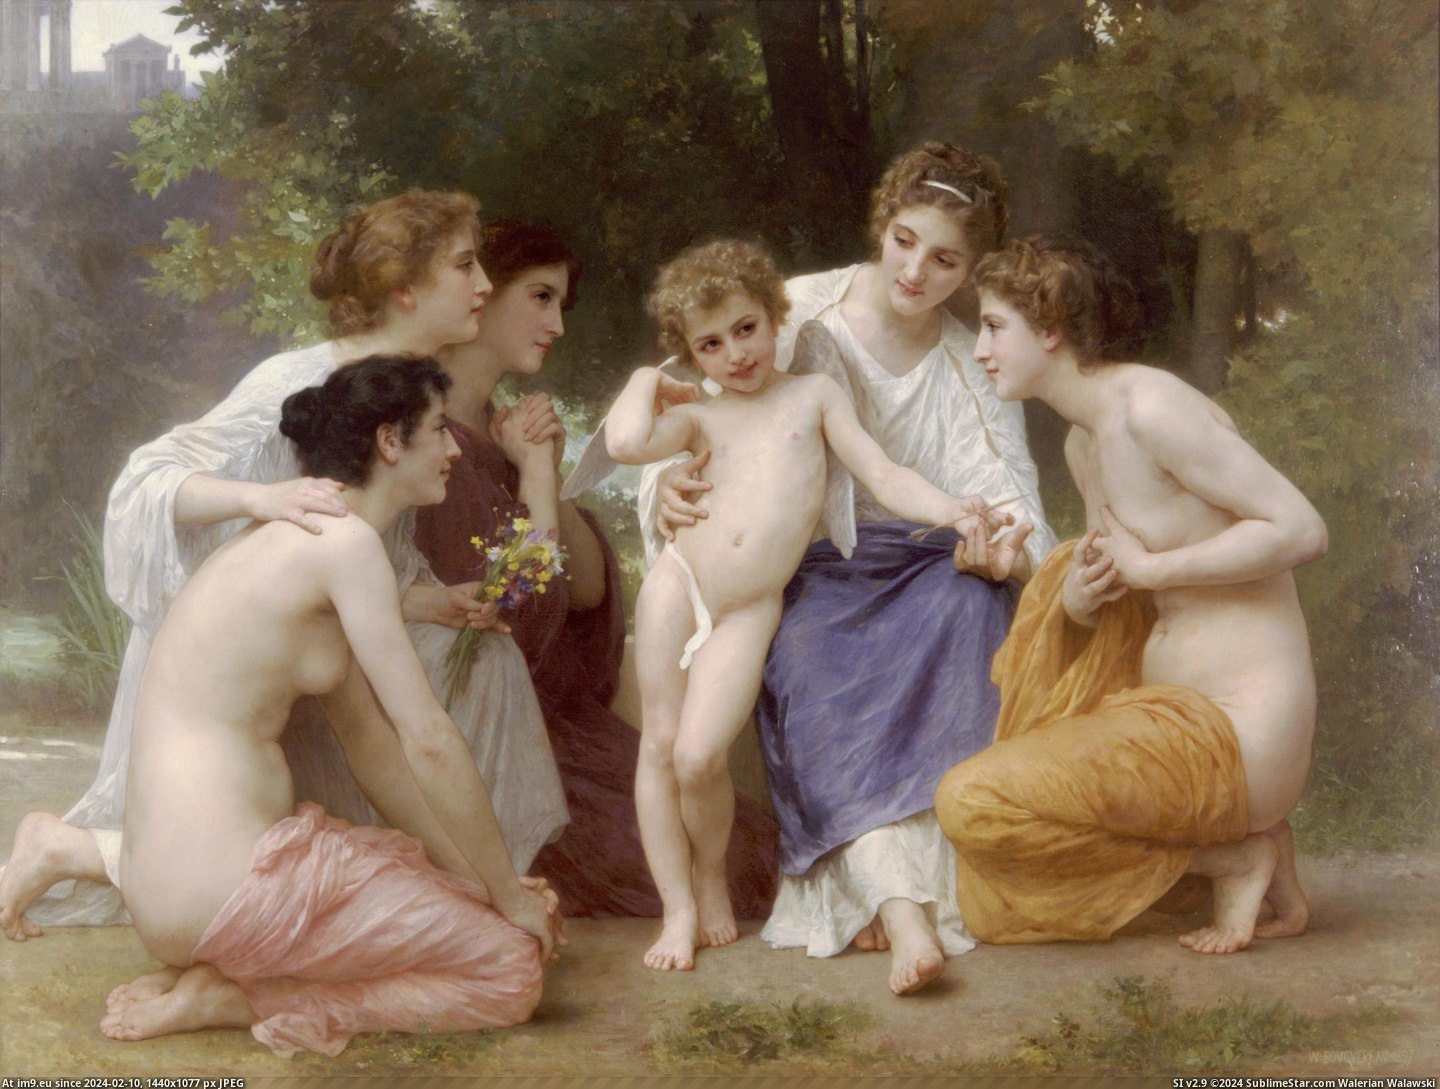 #Art #Painting #Bouguereau #Adolphe #Paintings #William (1897) Ladmiration - William Adolphe Bouguereau Pic. (Bild von album William Adolphe Bouguereau paintings (1825-1905)))